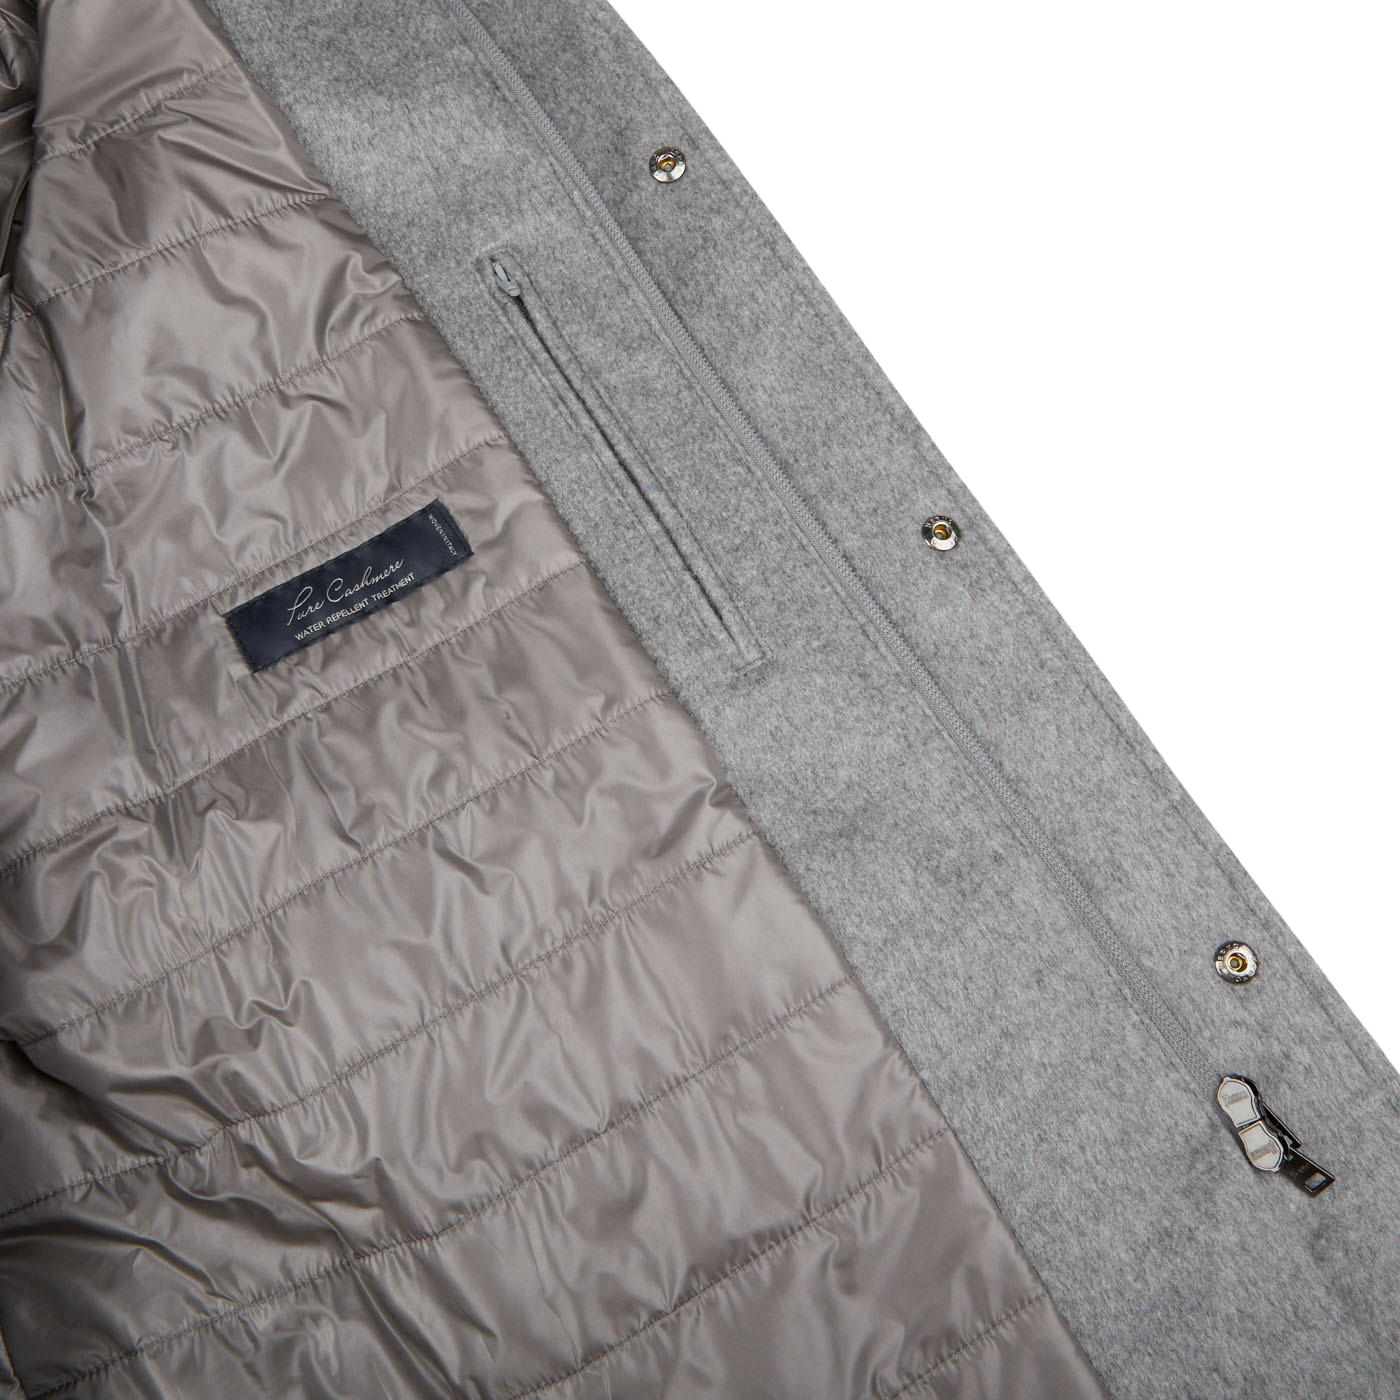 A Light Grey Water Repellent Cashmere Car Coat by Herno with a zipper.